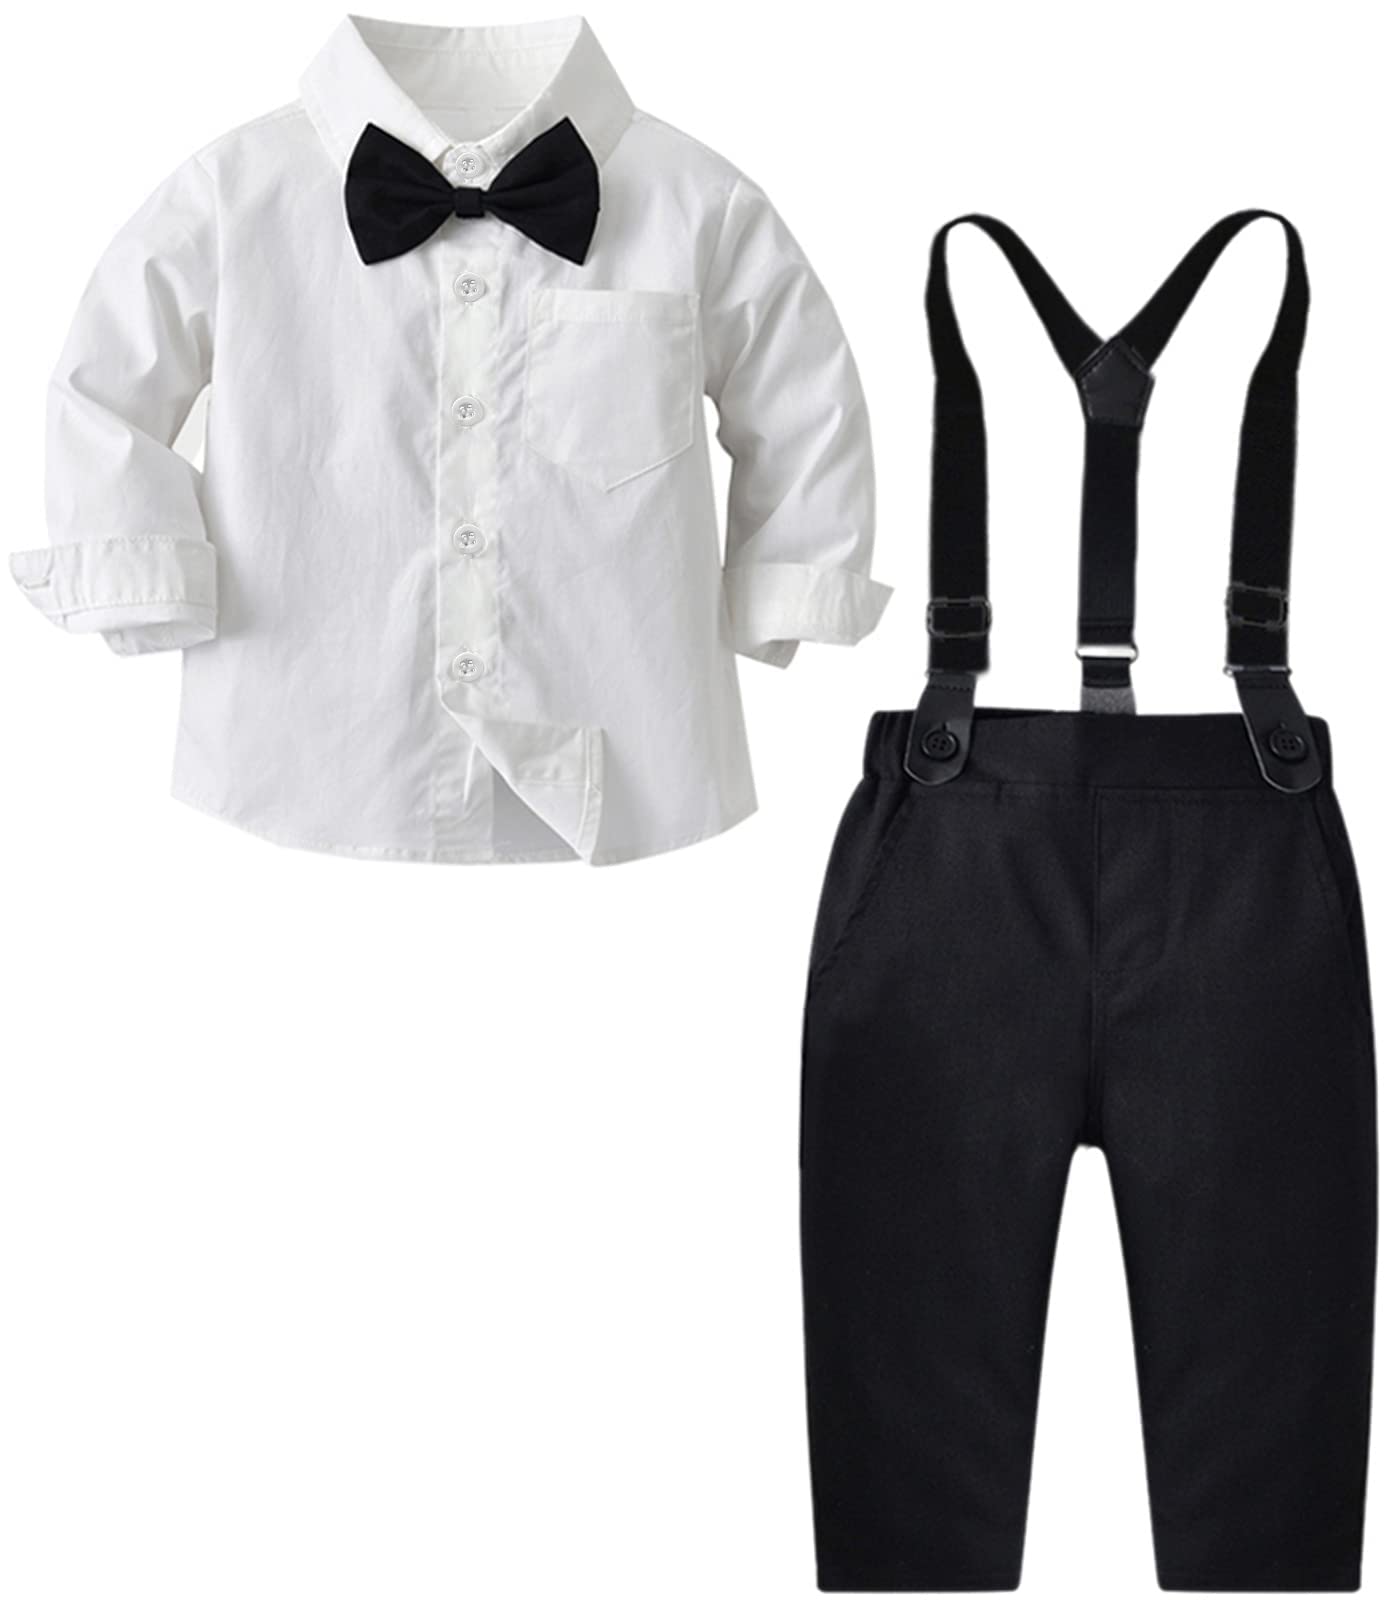 Sangtree Baby Boys Clothes, Long Sleeves Dress Shirt With Bow Tie And Black Suspender Pants Set Gentleman Tuxedo Outfit White Bl